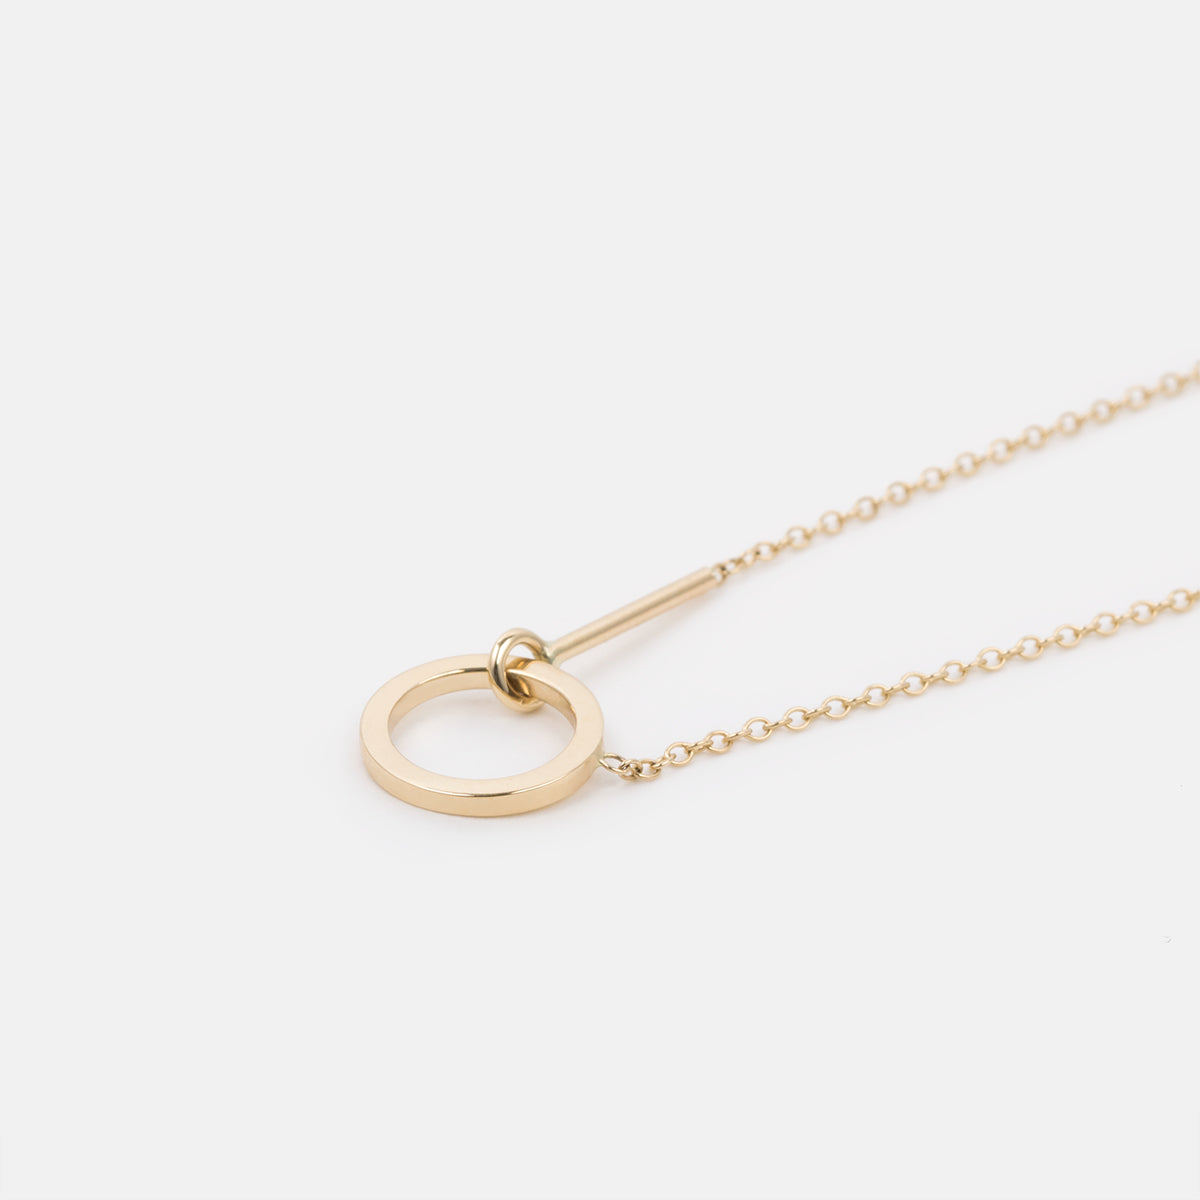 Visata Plain Necklace in 14k Gold By SHW Fine Jewelry NYC